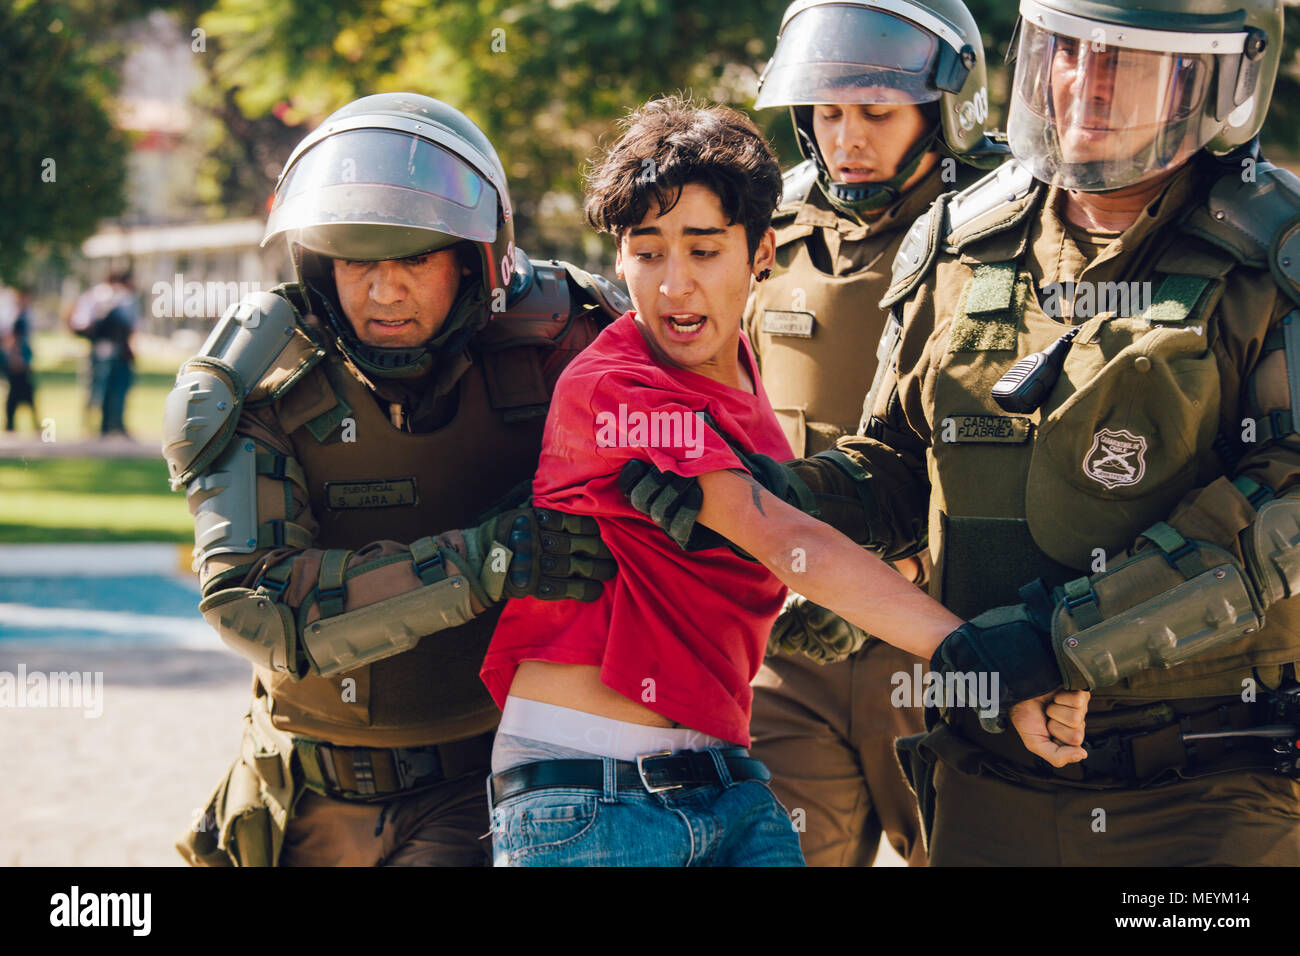 Santiago, Chile - April 19, 2018: Protester arrested in the University of Santiago during a demonstration demanding an end to the Profit in the Educat Stock Photo